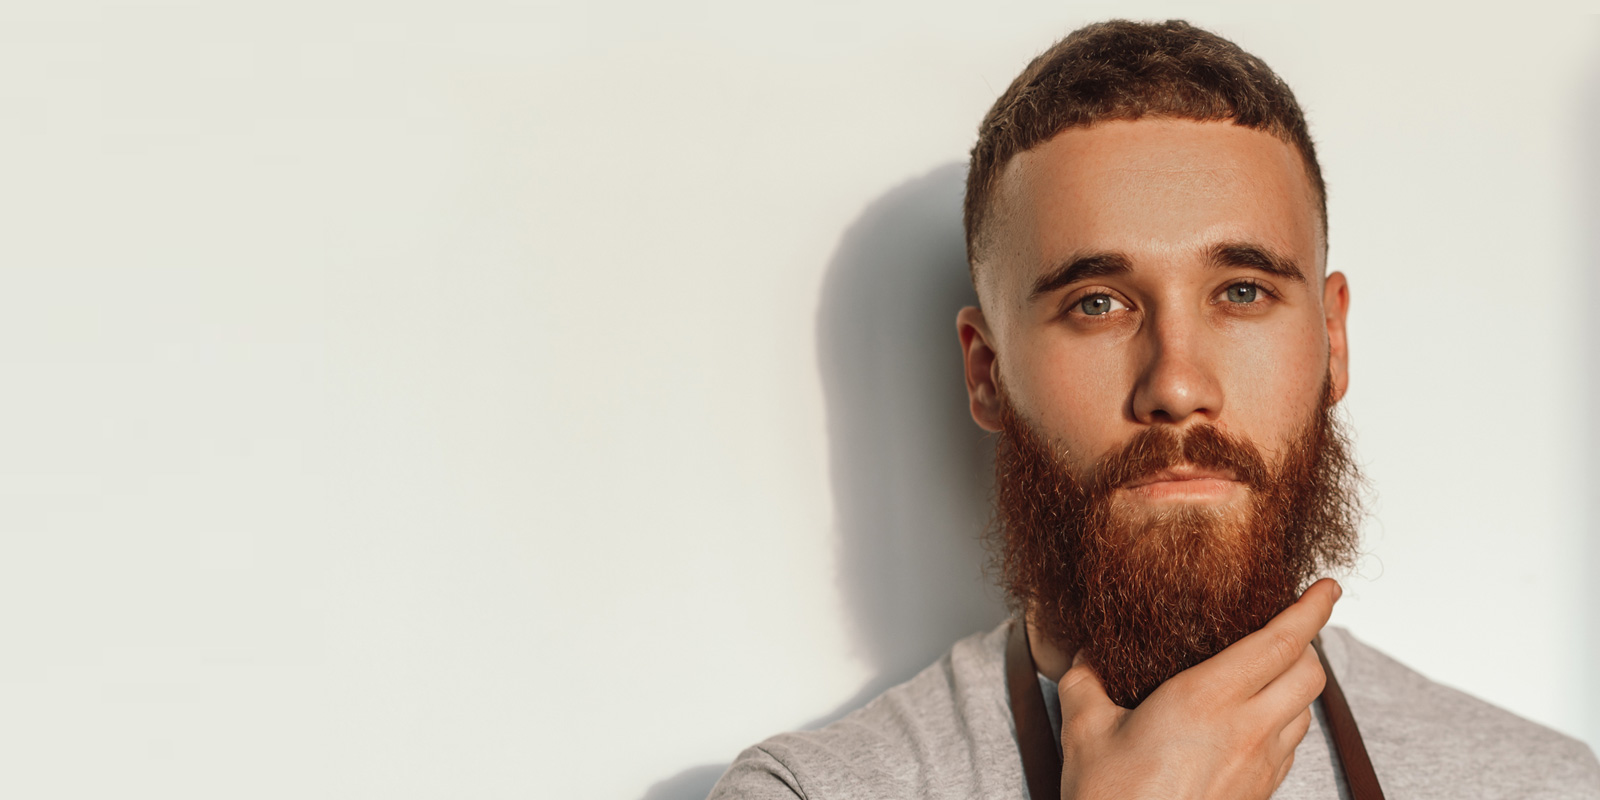 How Long Does It Take to Grow a Beard? Tips, Genetics, and More